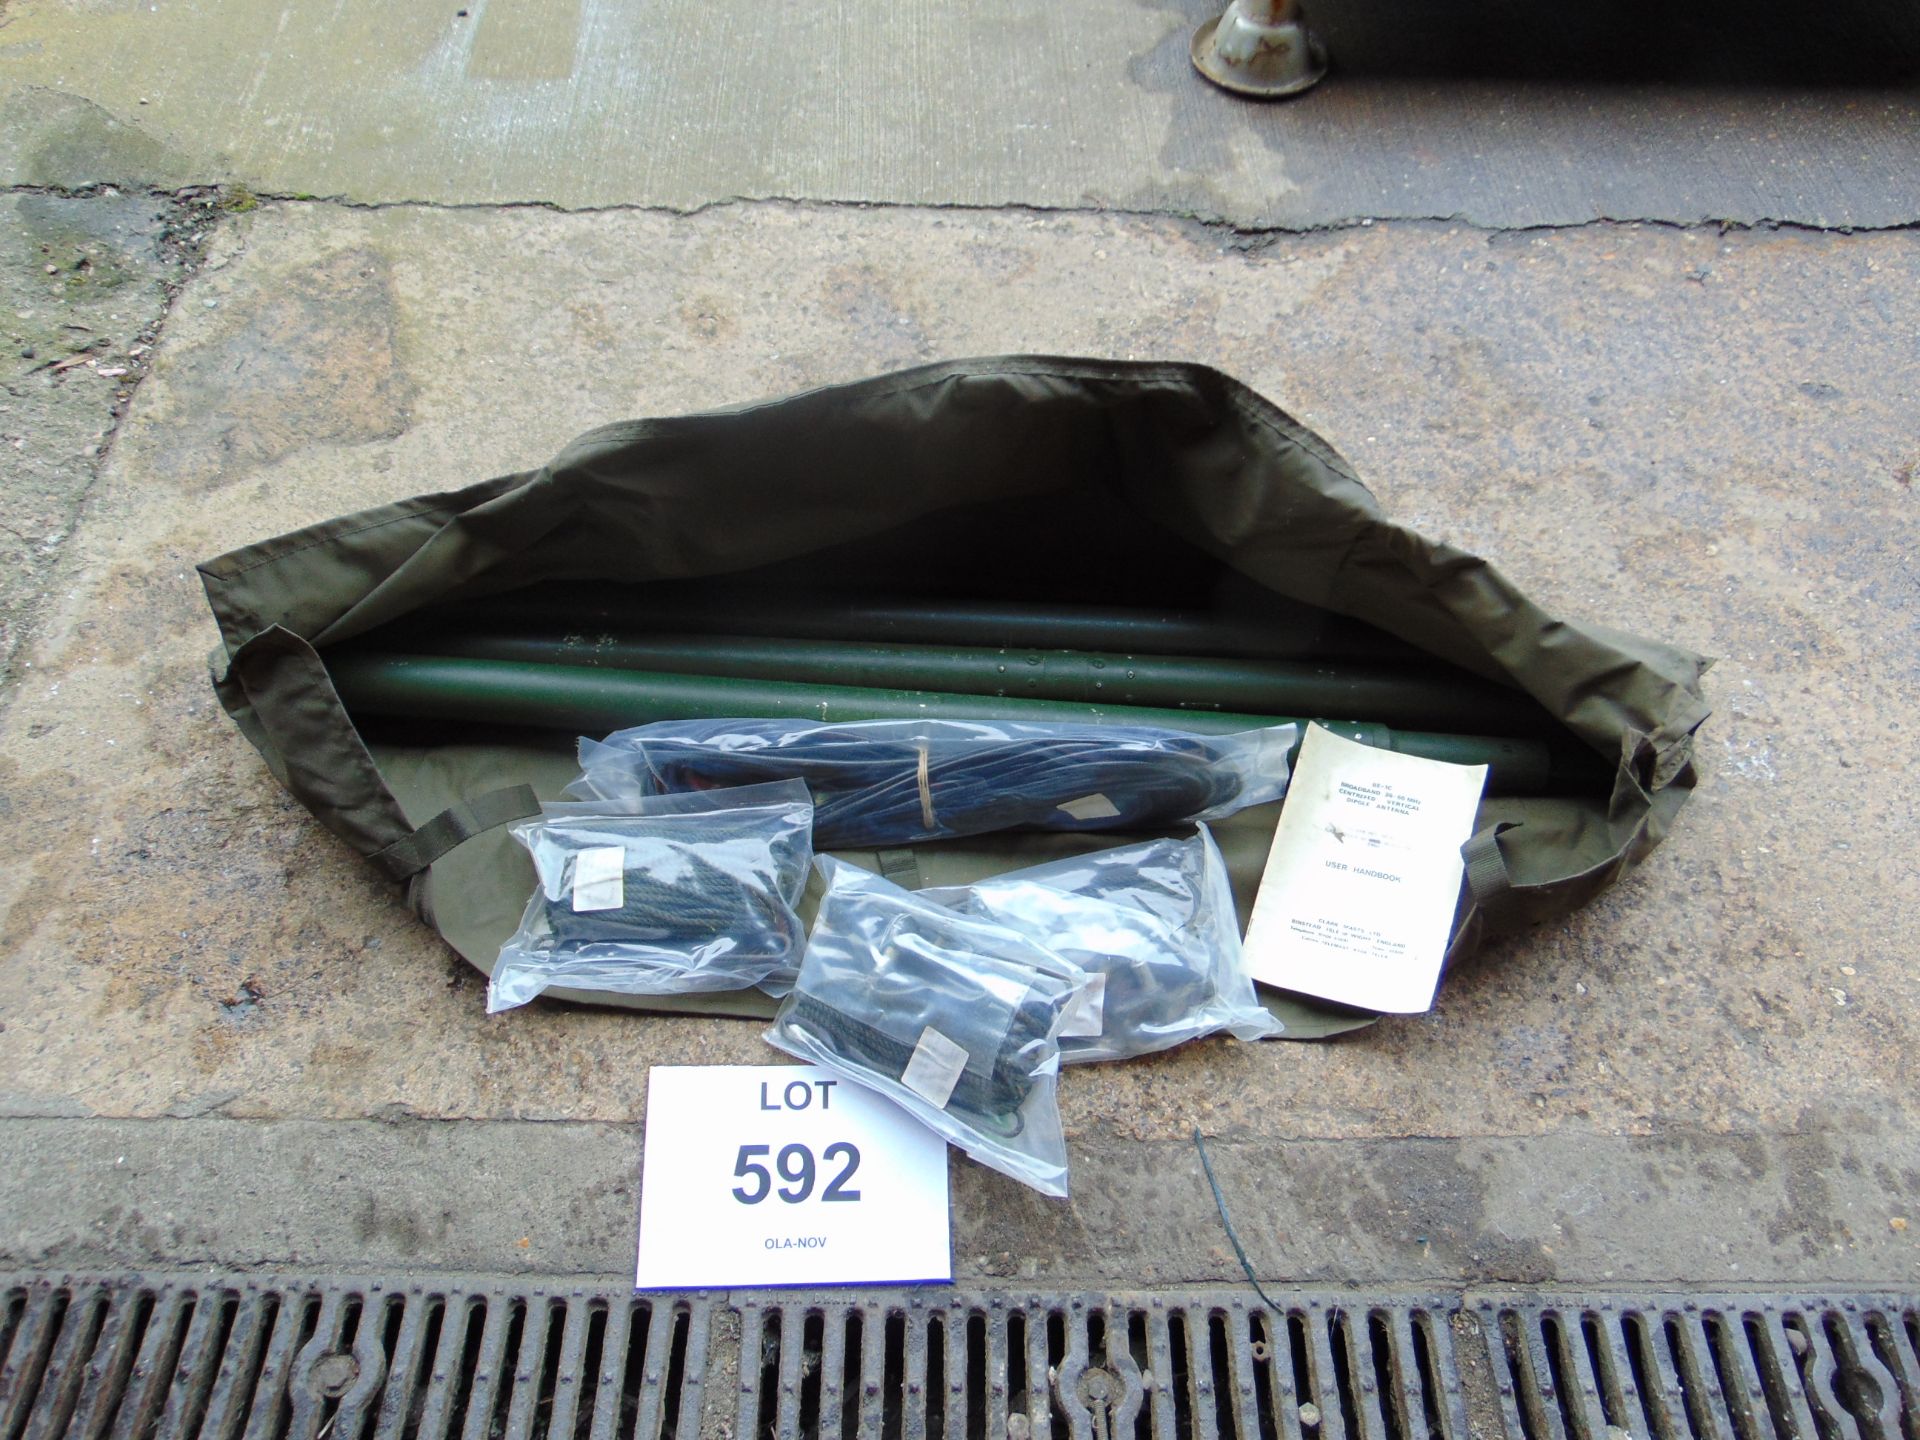 New Unissued Clansman Antenna Kit c/w Instructions in bag